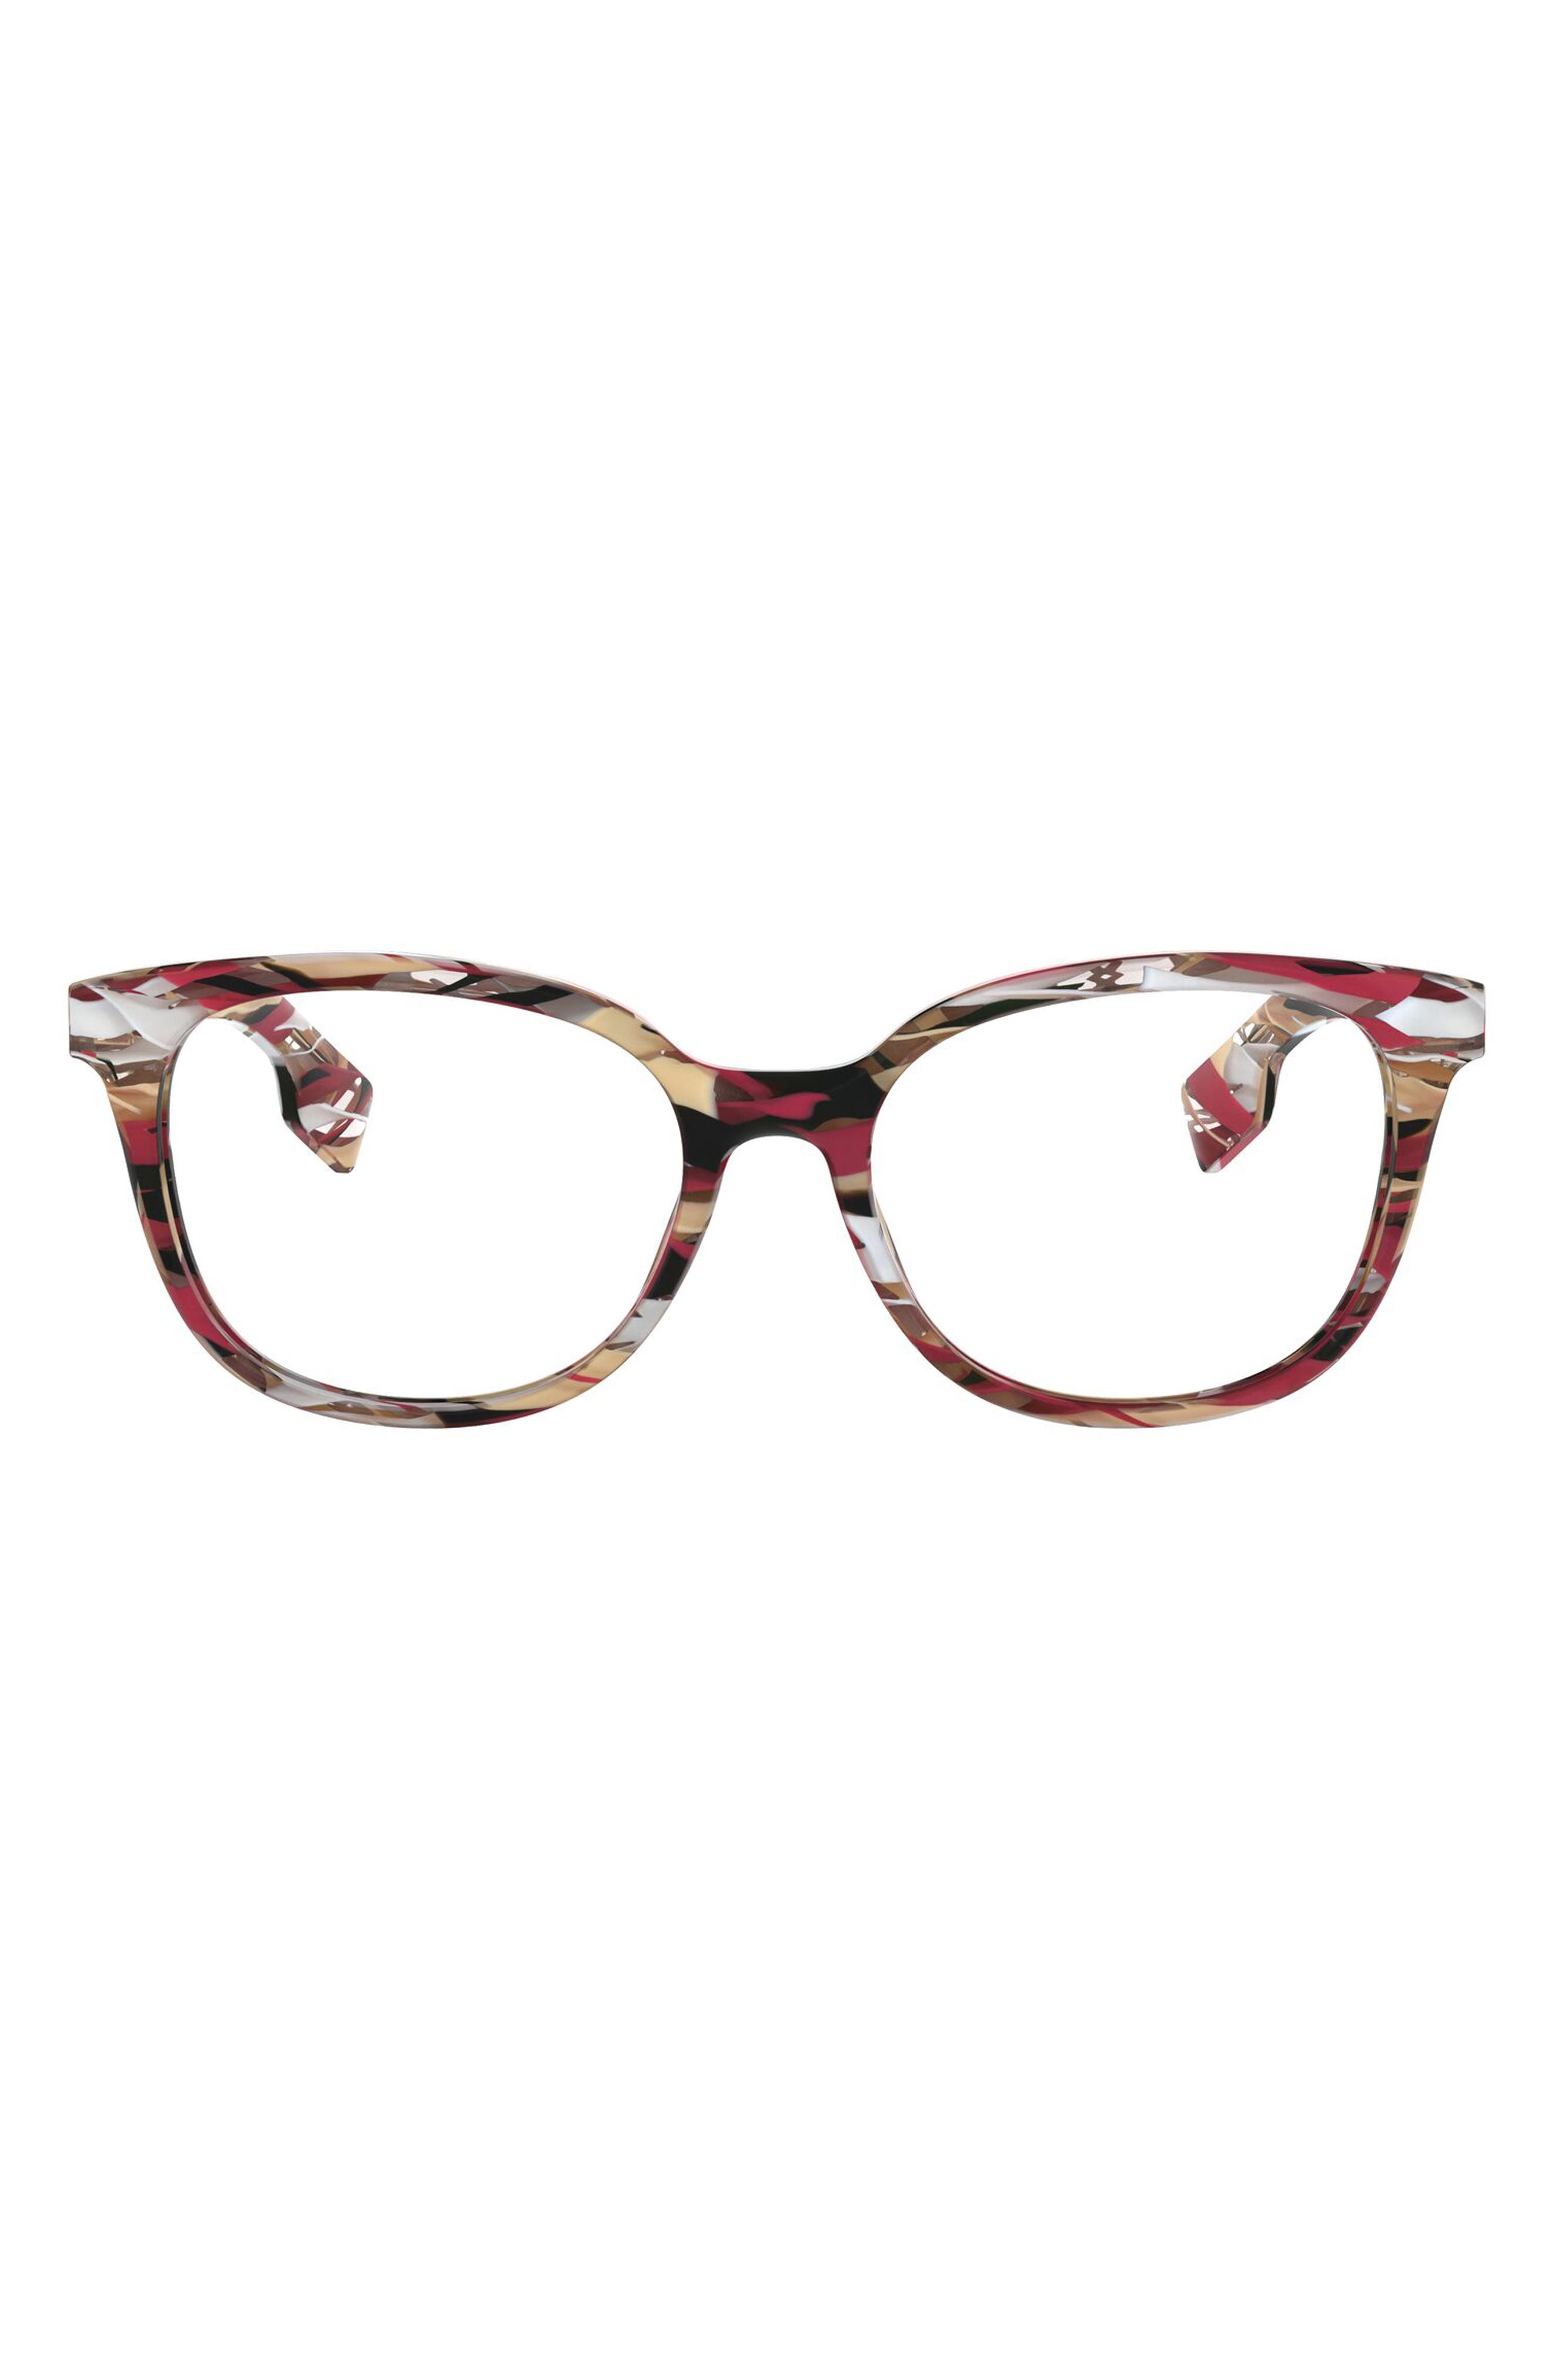 Burberry 53mm Cat Eye Optical Glasses in Red Multi at Nordstrom